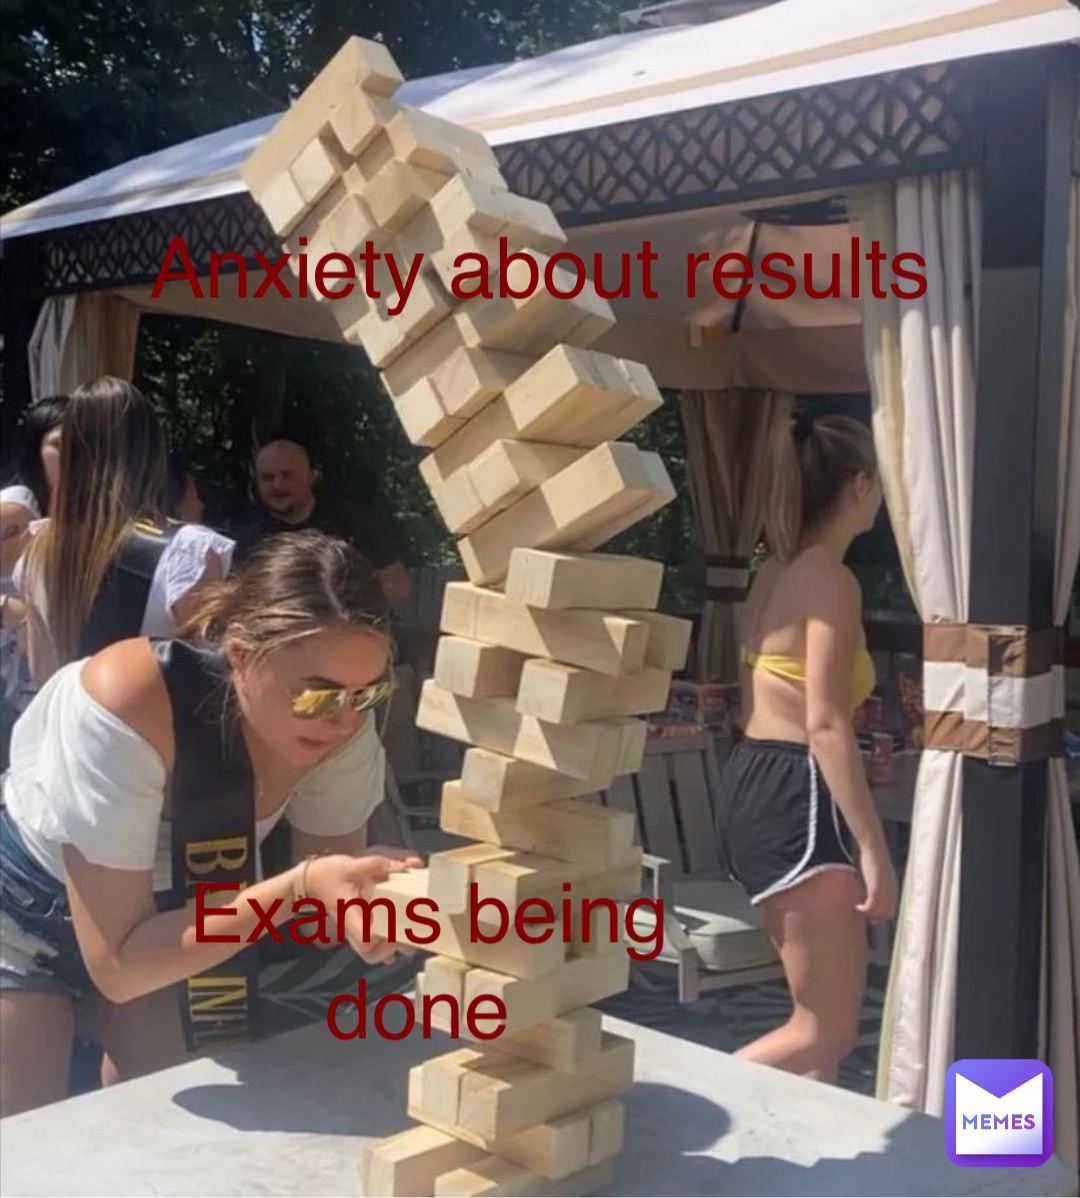 Exams being done Anxiety about results